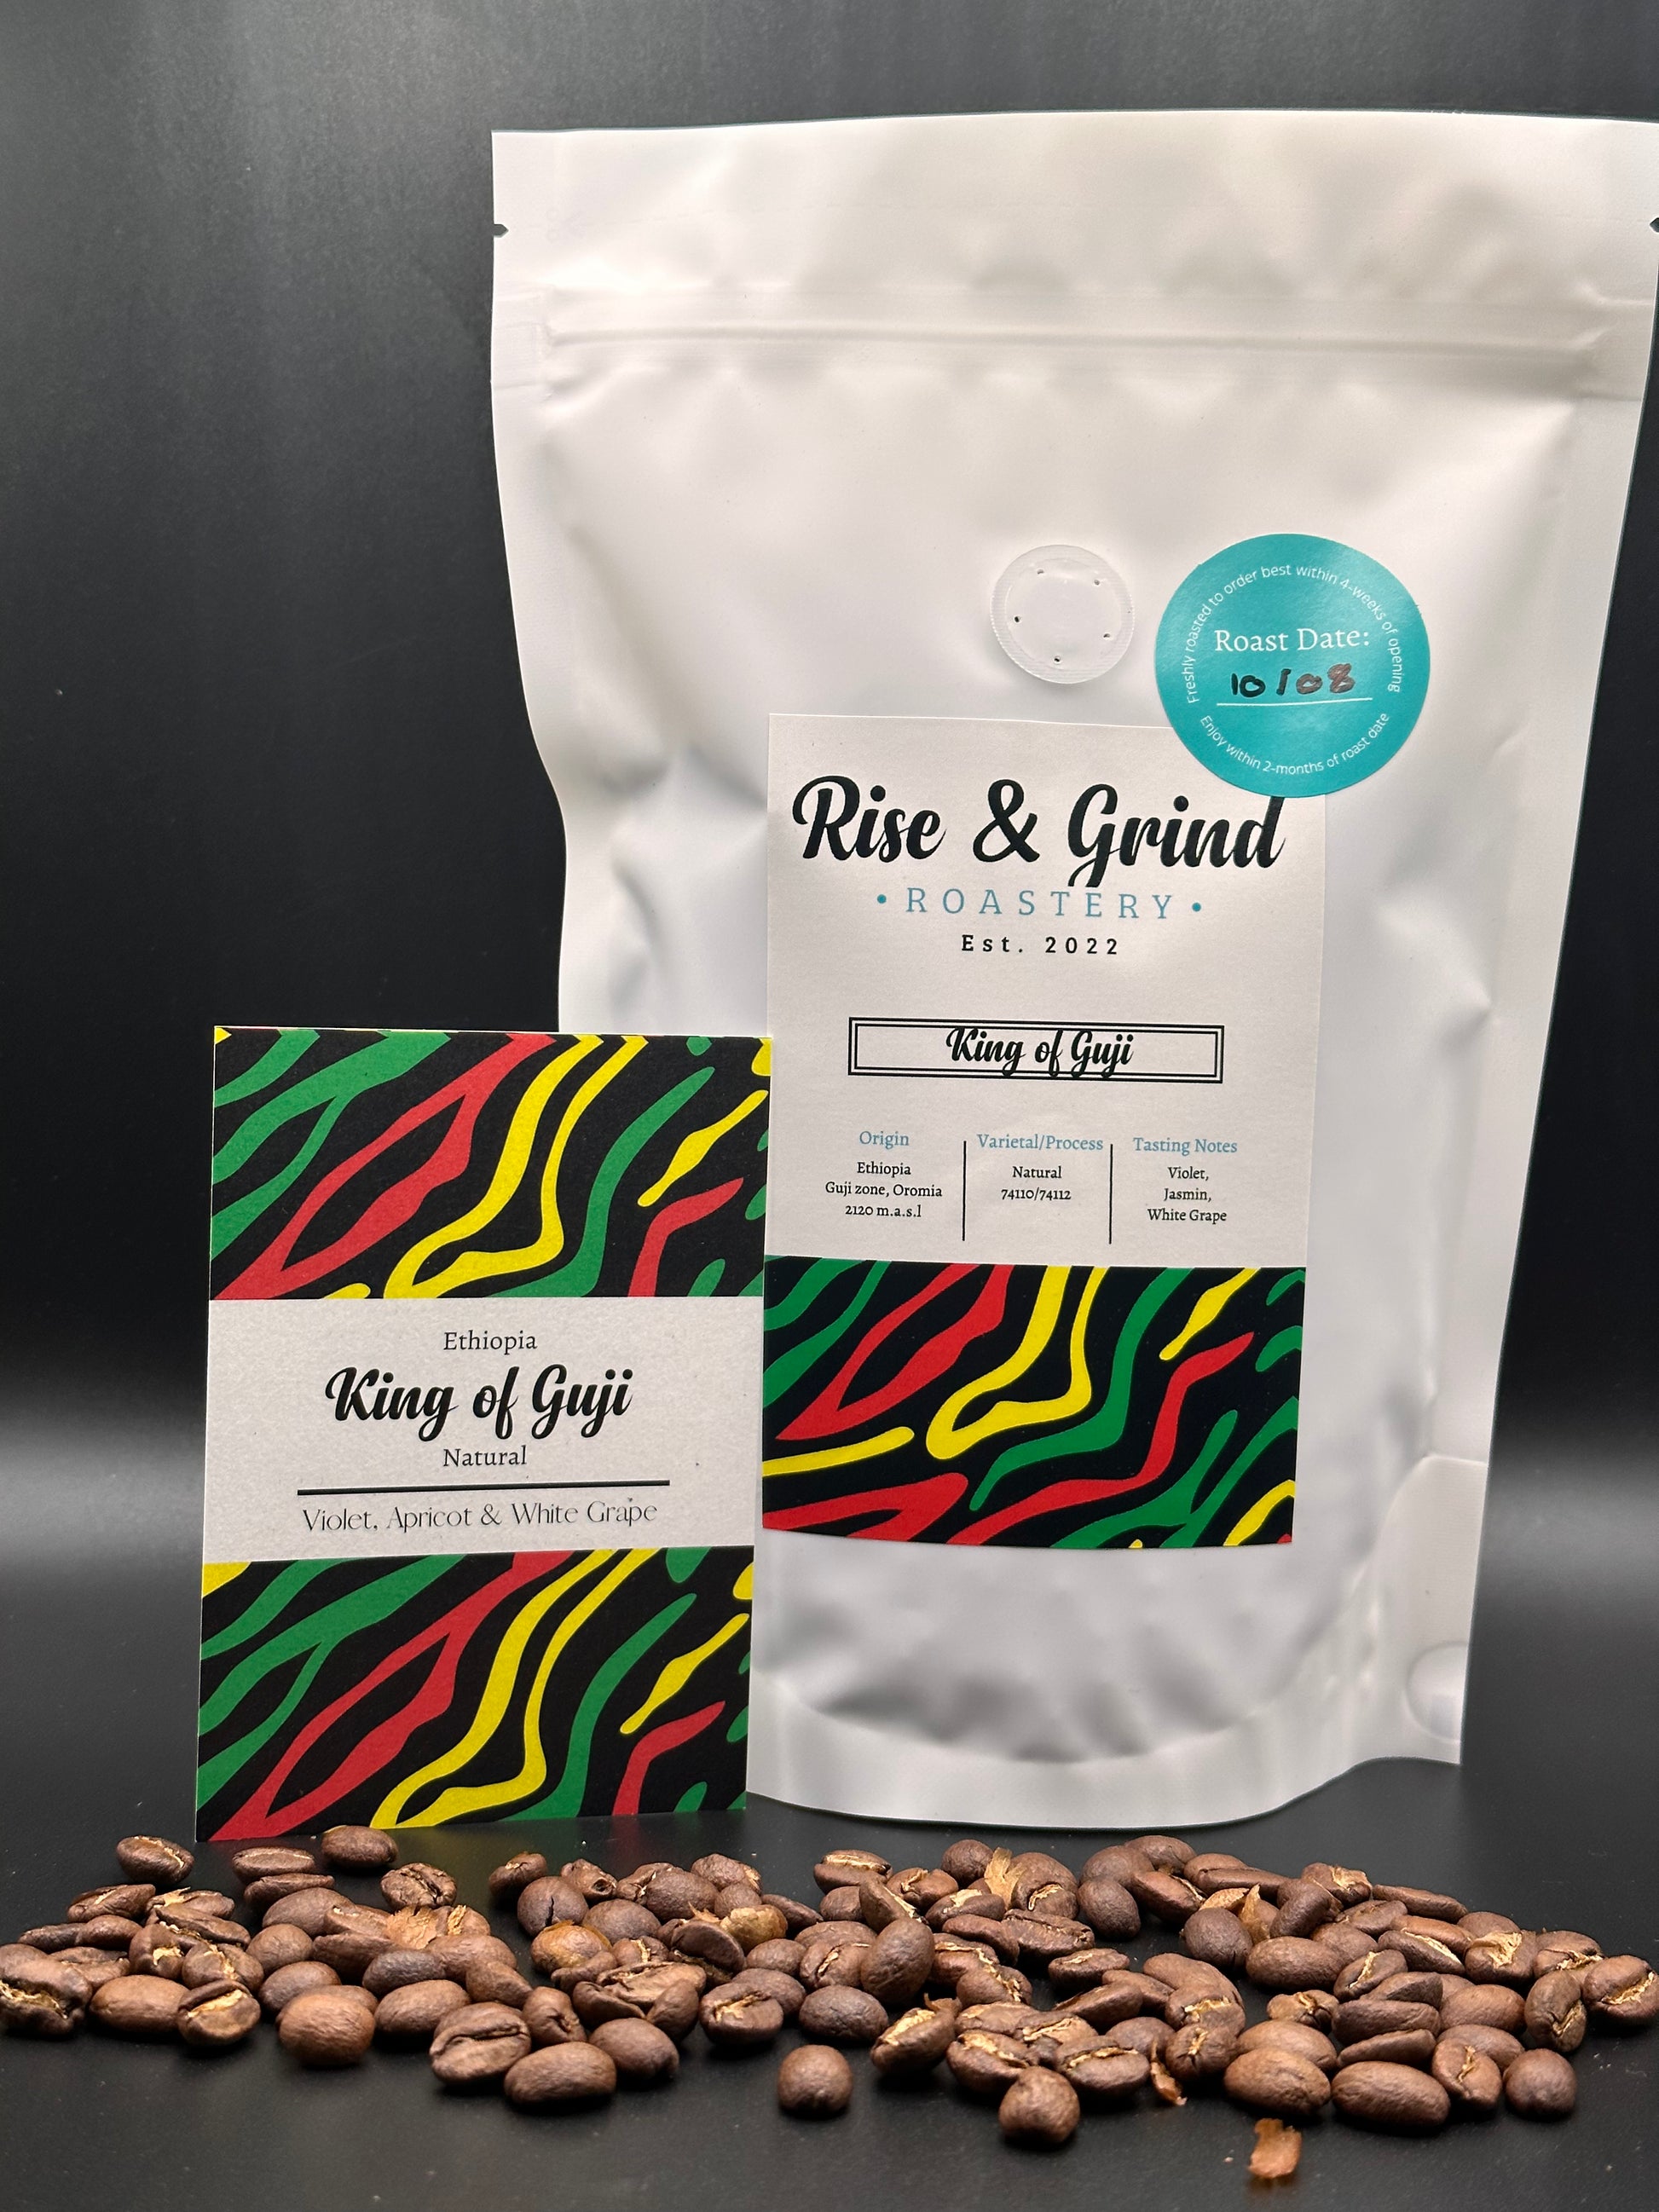 Discover the world of specialty coffee with our monthly subscription service. Each month, indulge in a new coffee experience, meticulously curated and freshly roasted to perfection. Join us on a journey of exploration and delight as we showcase the finest beans from around the globe, delivered conveniently to your doorstep. Bag 1